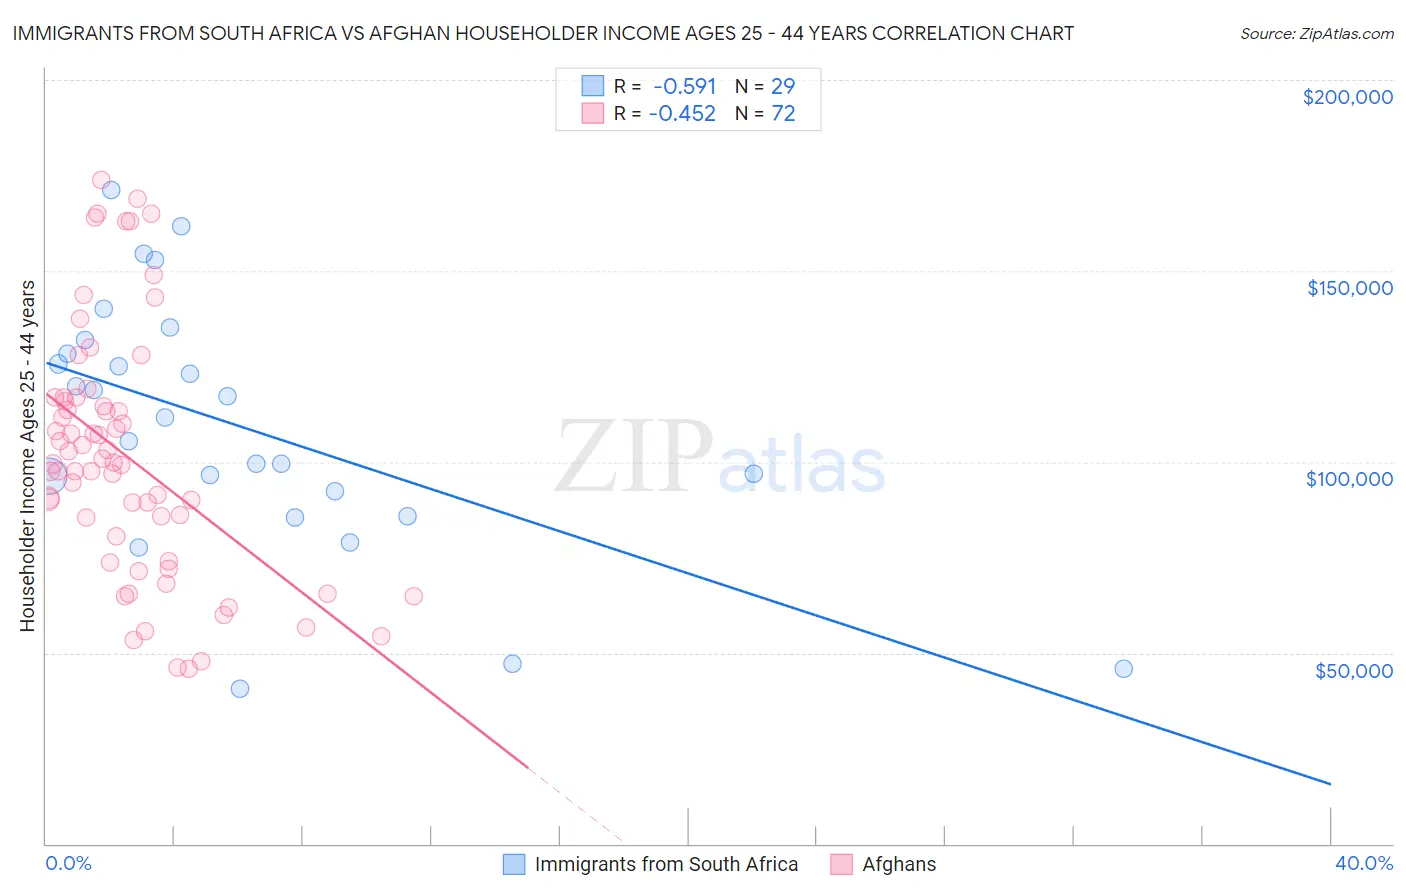 Immigrants from South Africa vs Afghan Householder Income Ages 25 - 44 years